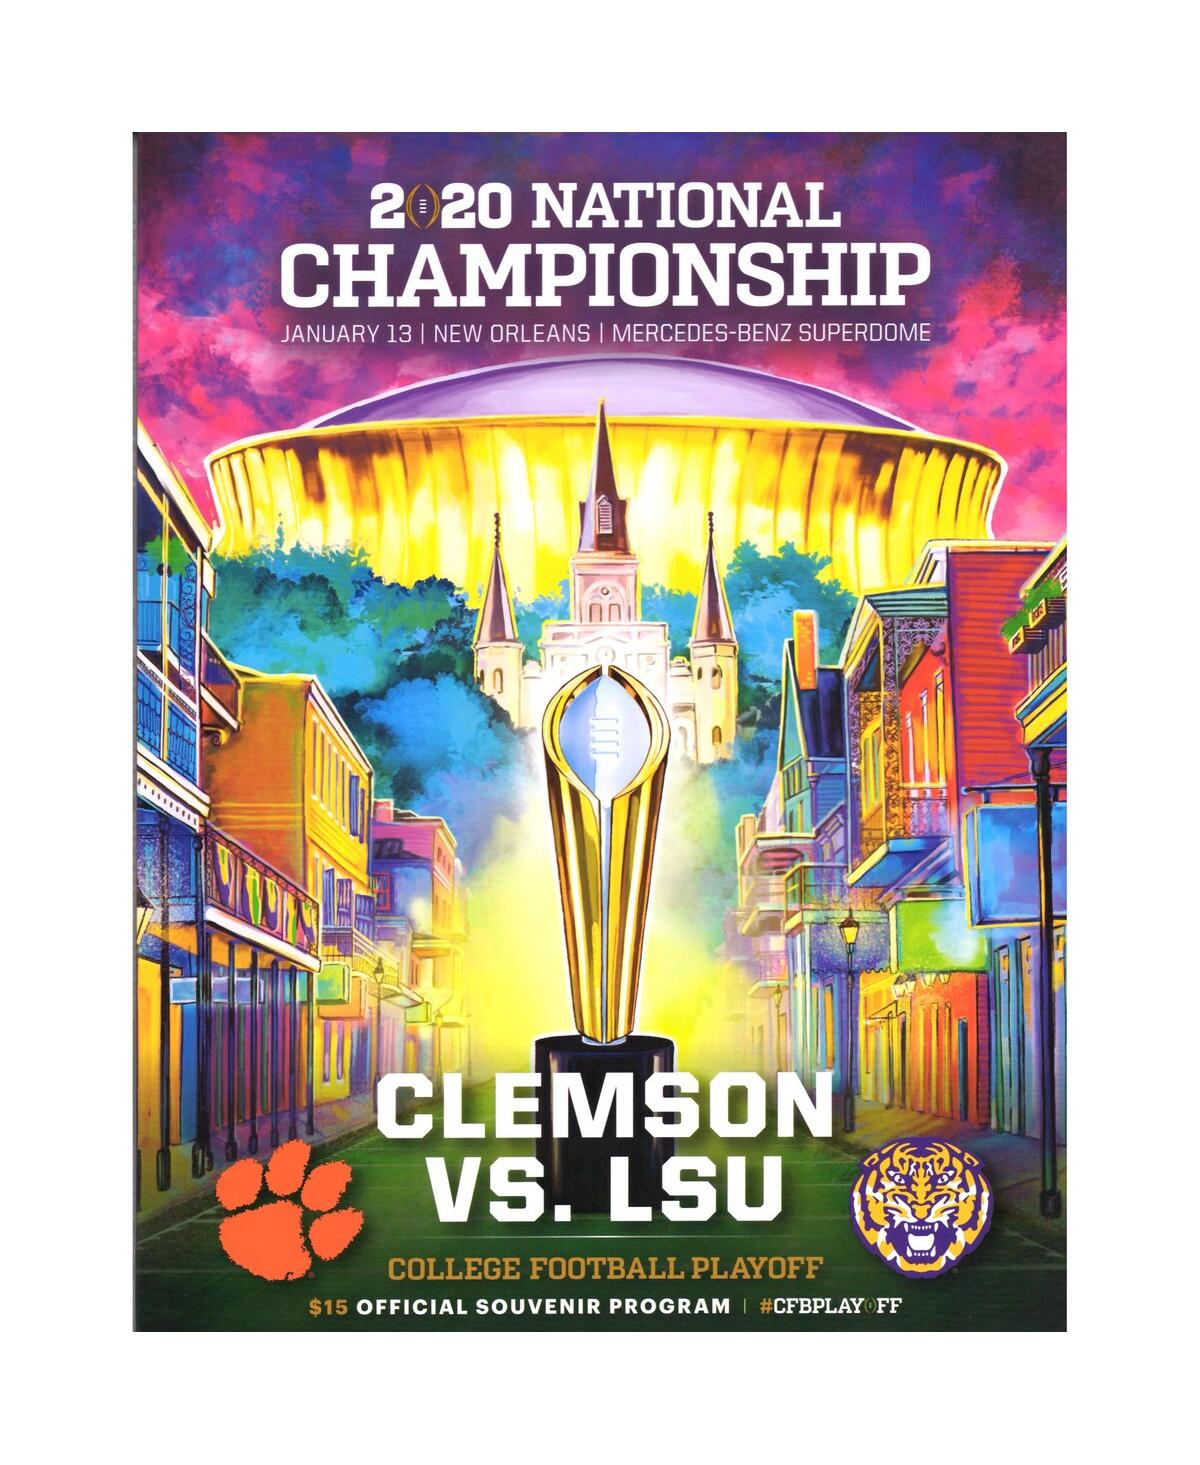 Clemson Tigers vs. Lsu Tigers College Football Playoff 2020 National Championship Game Official Program - Multi